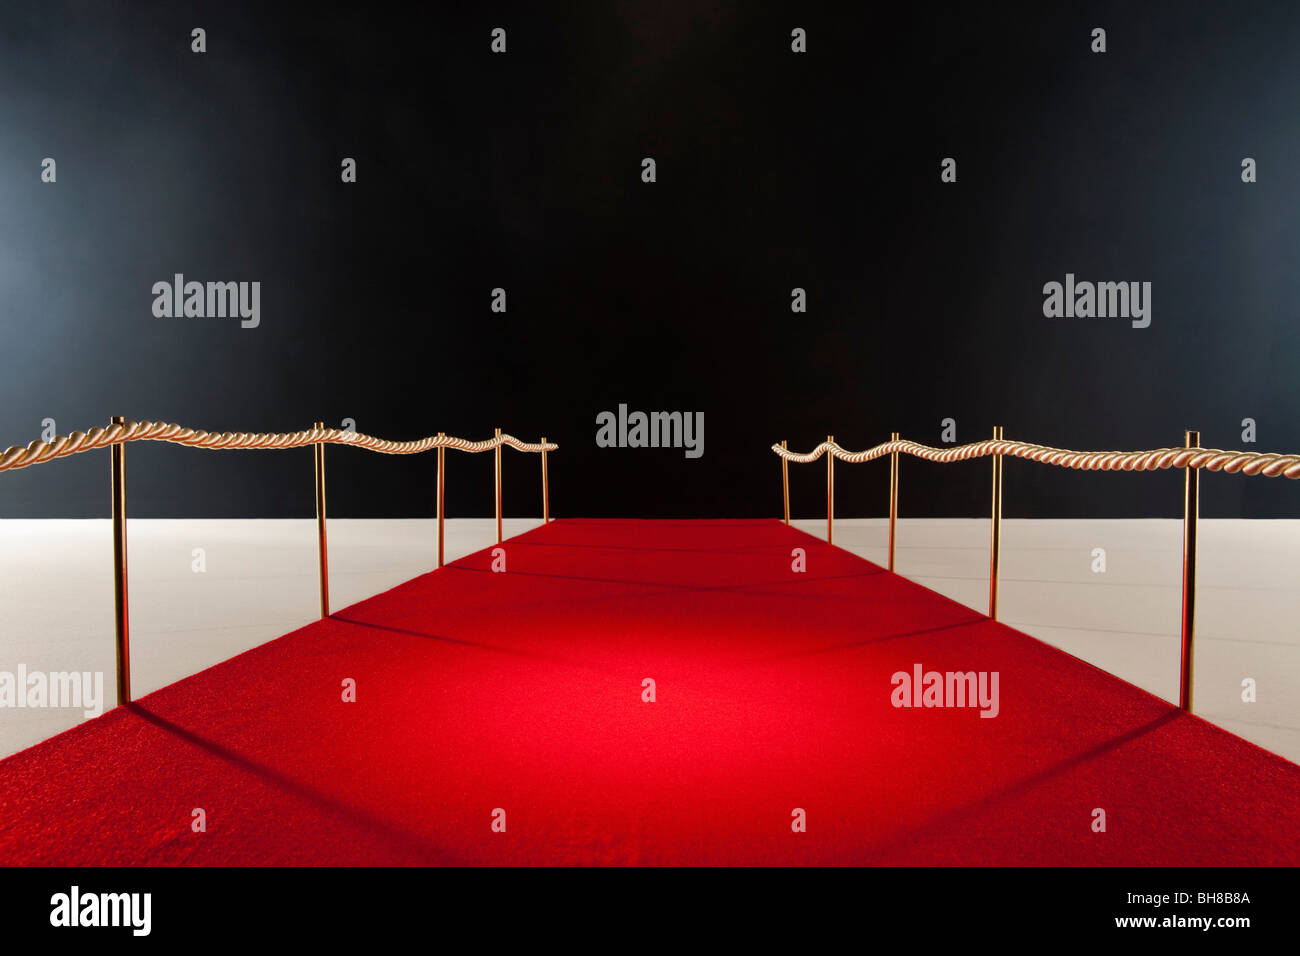 View down red carpet with rope barriers Stock Photo